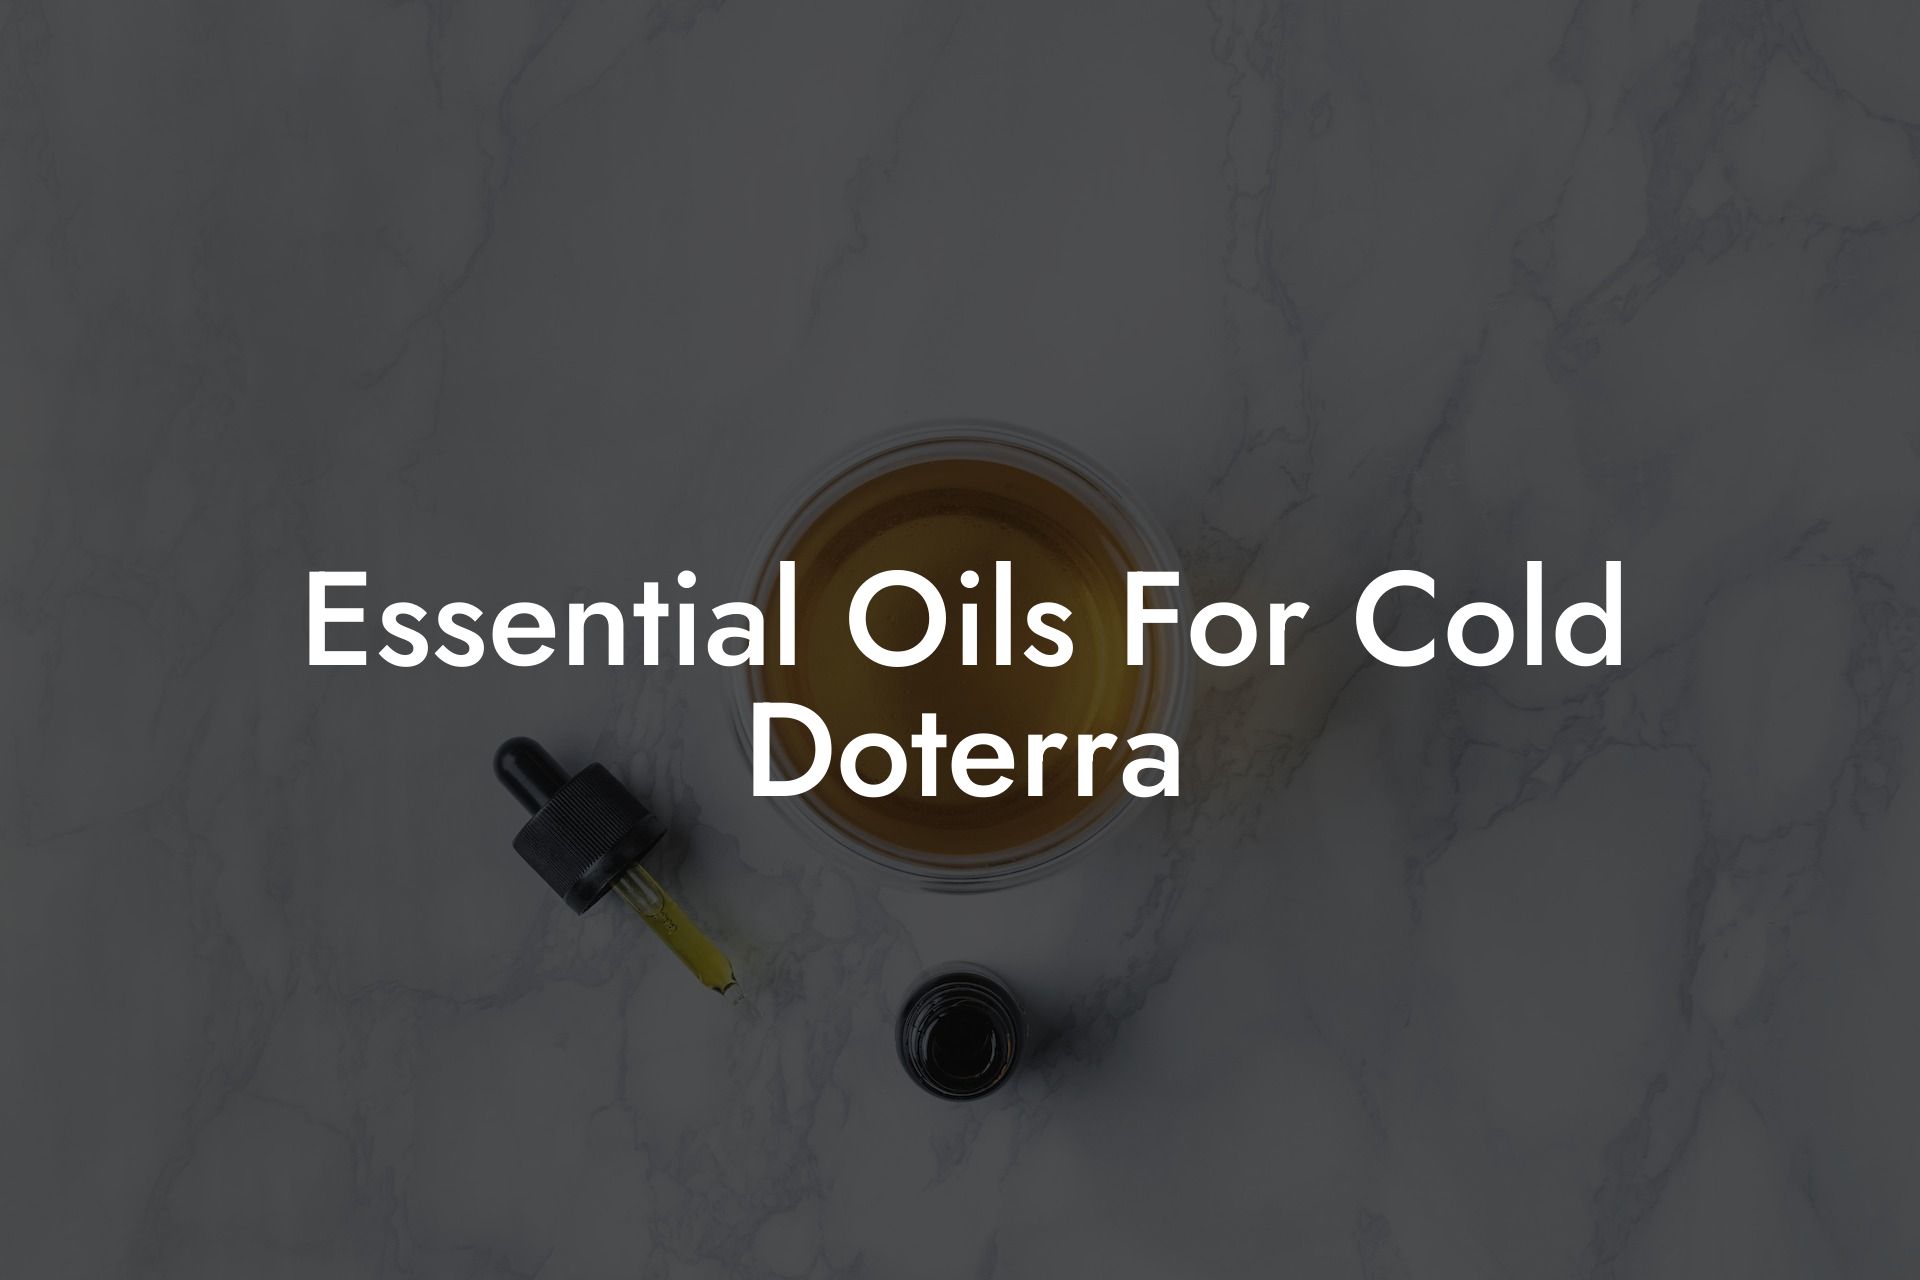 Essential Oils For Cold Doterra